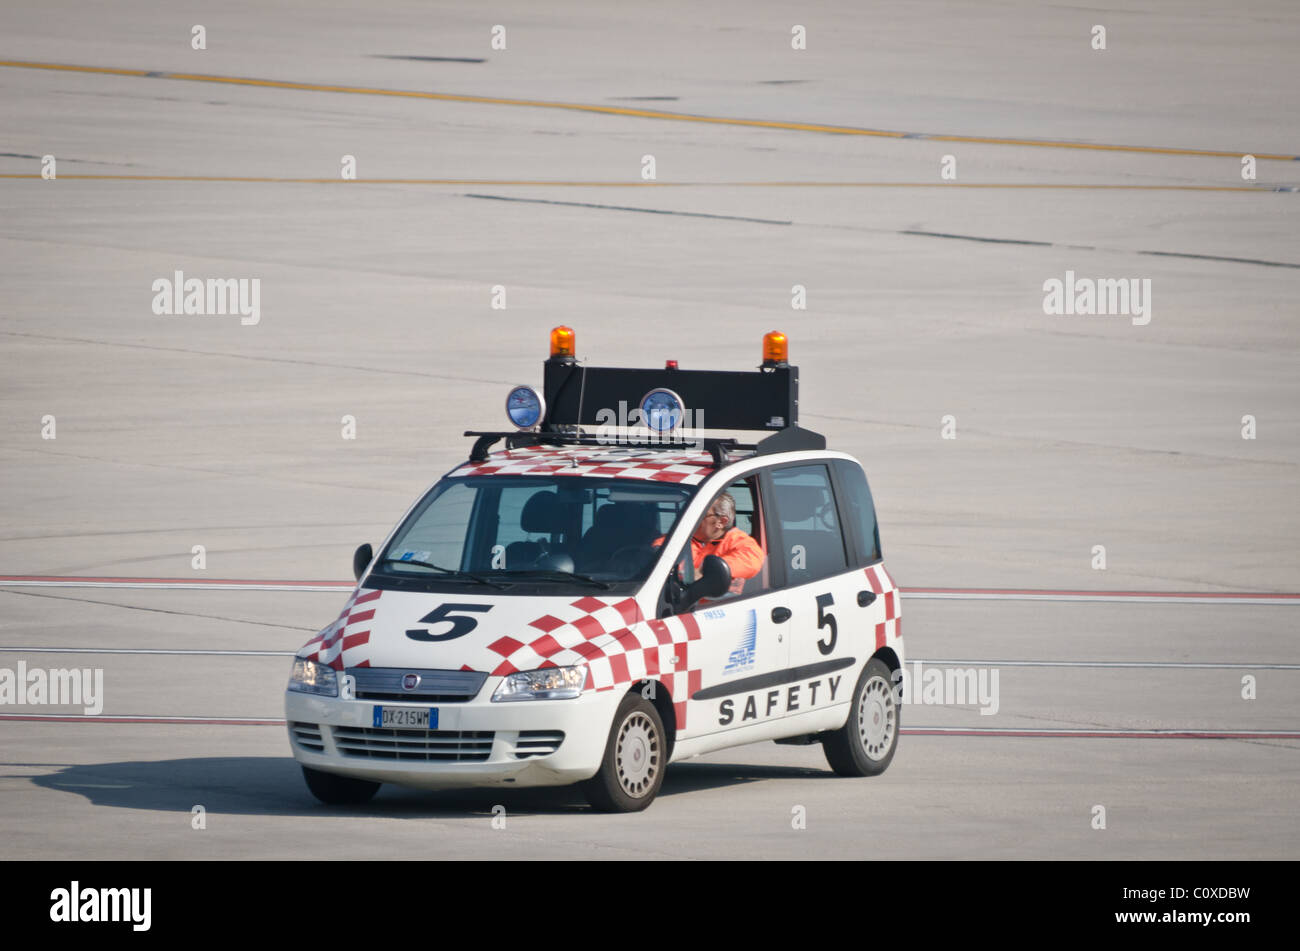 safety car on runway airport Stock Photo